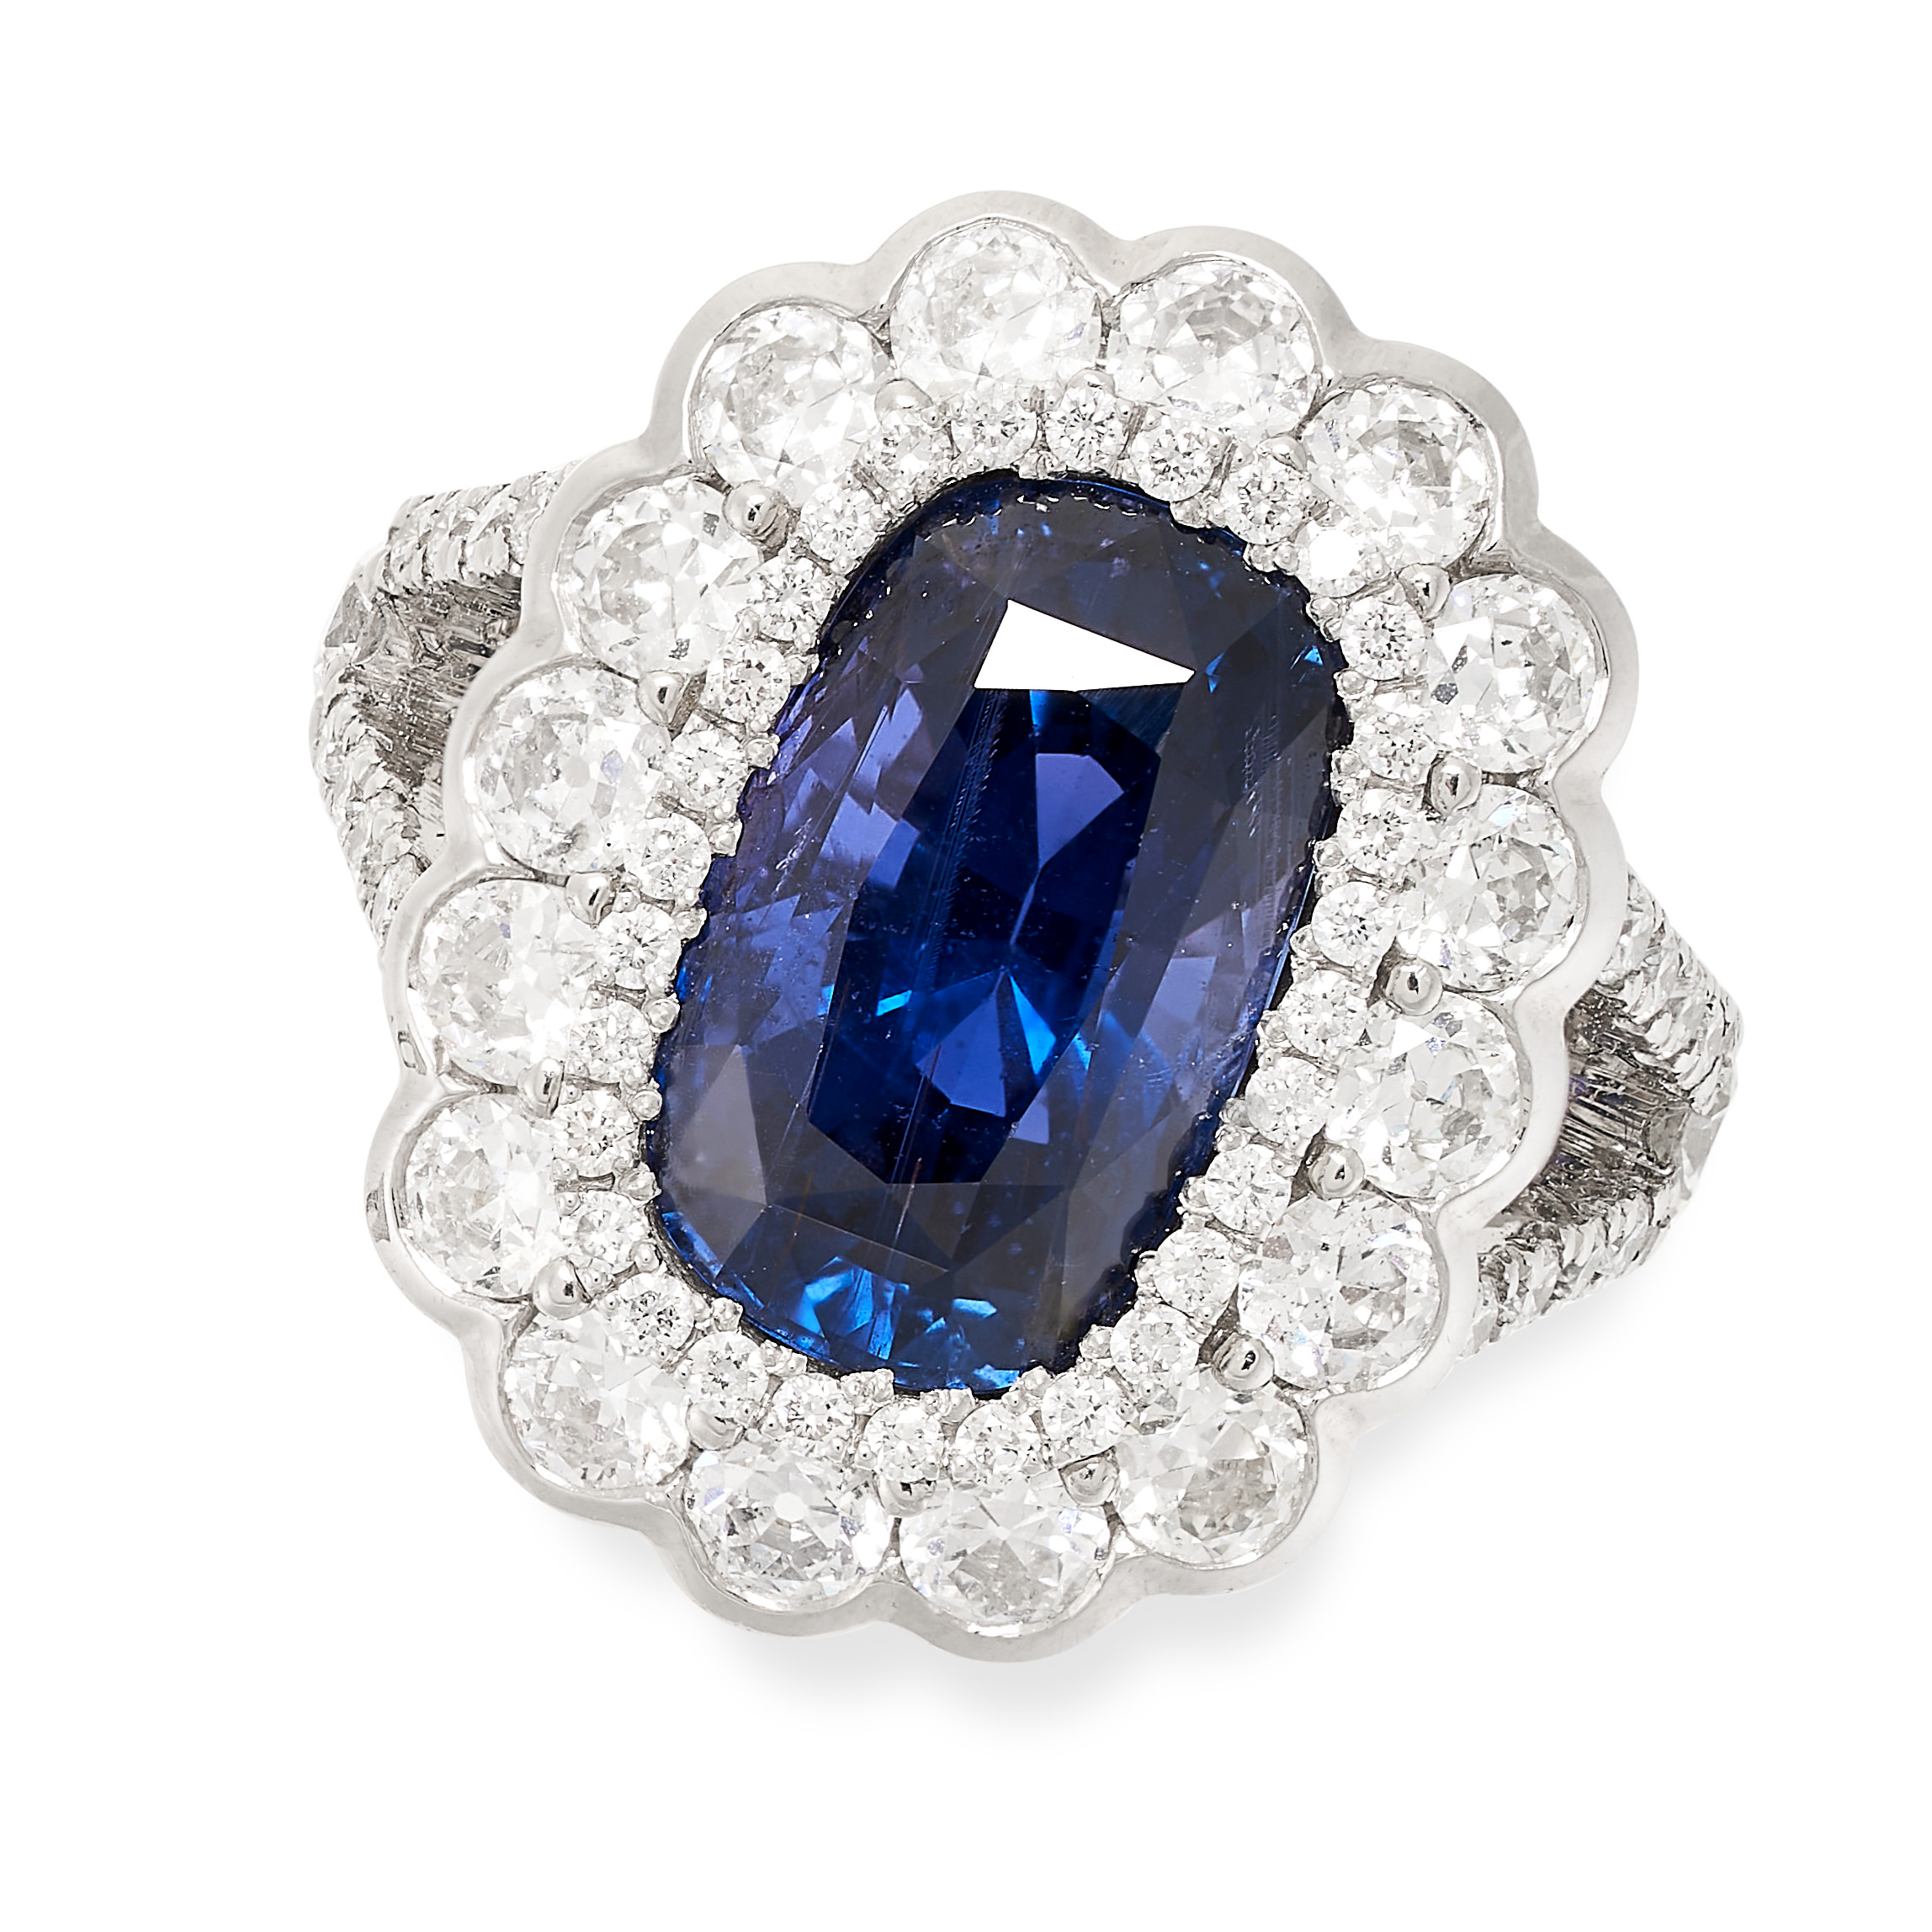 AN UNHEATED SAPPHIRE AND DIAMOND CLUSTER RING in platinum, set with a central cushion cut sapphire